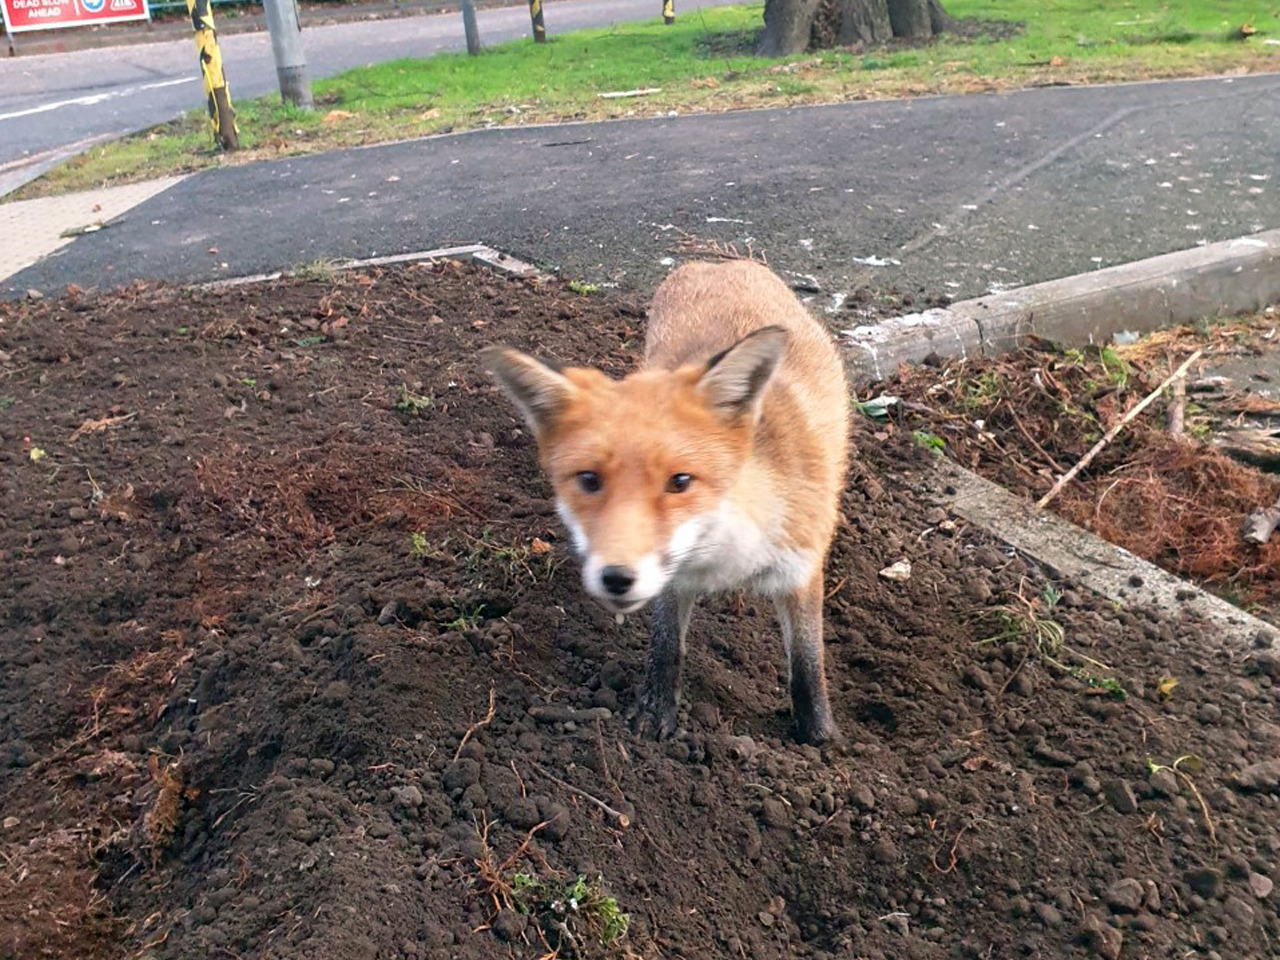 Wildlife at the Western - Wee Foxy - image thanks to Jim Scott